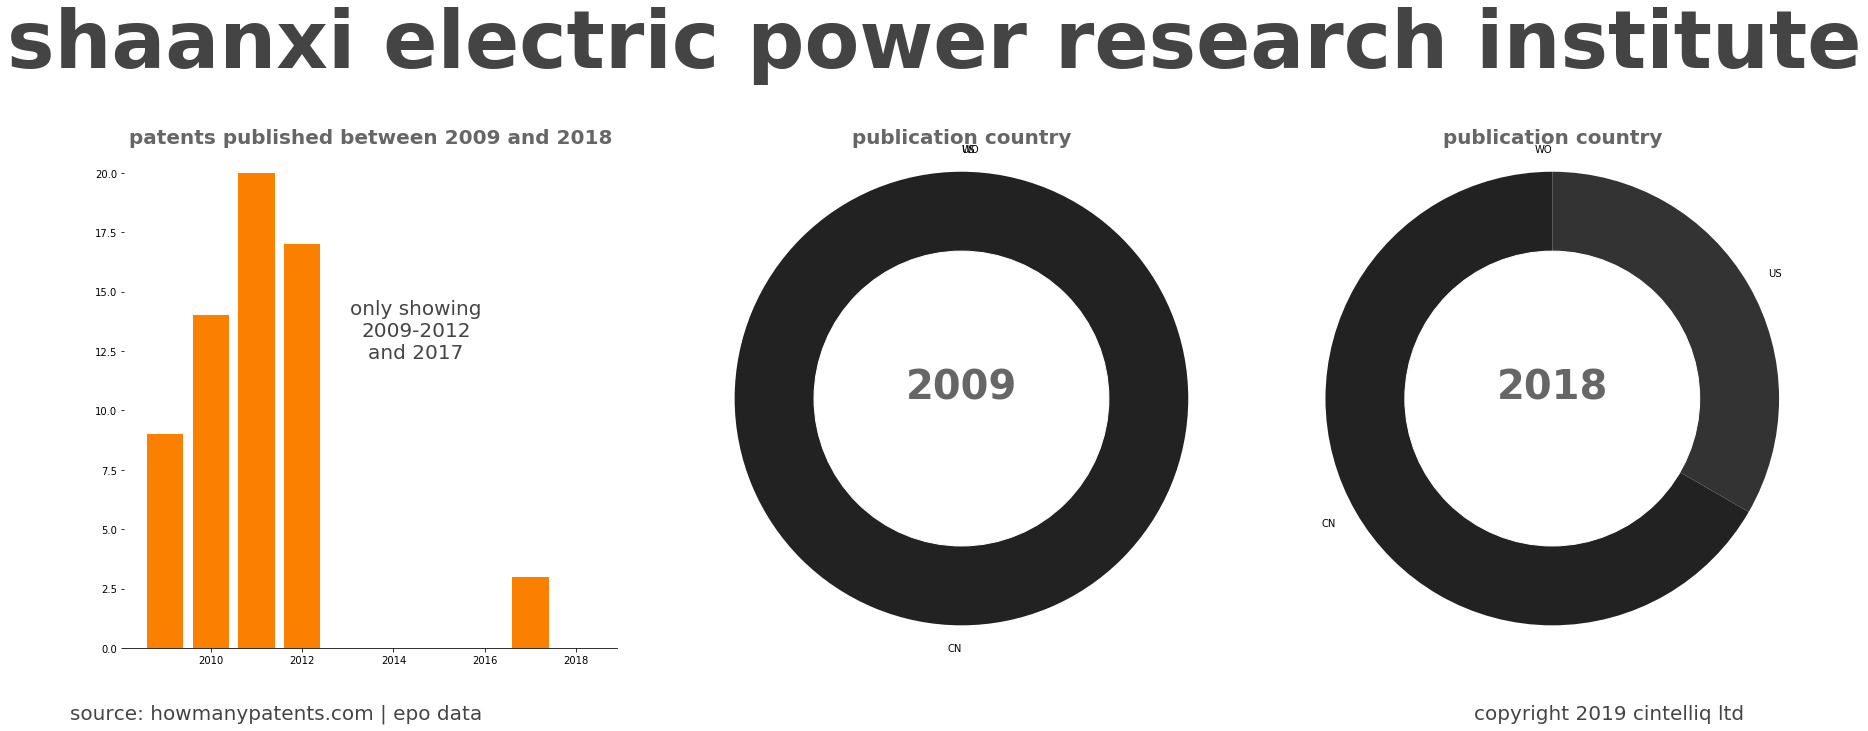 summary of patents for Shaanxi Electric Power Research Institute